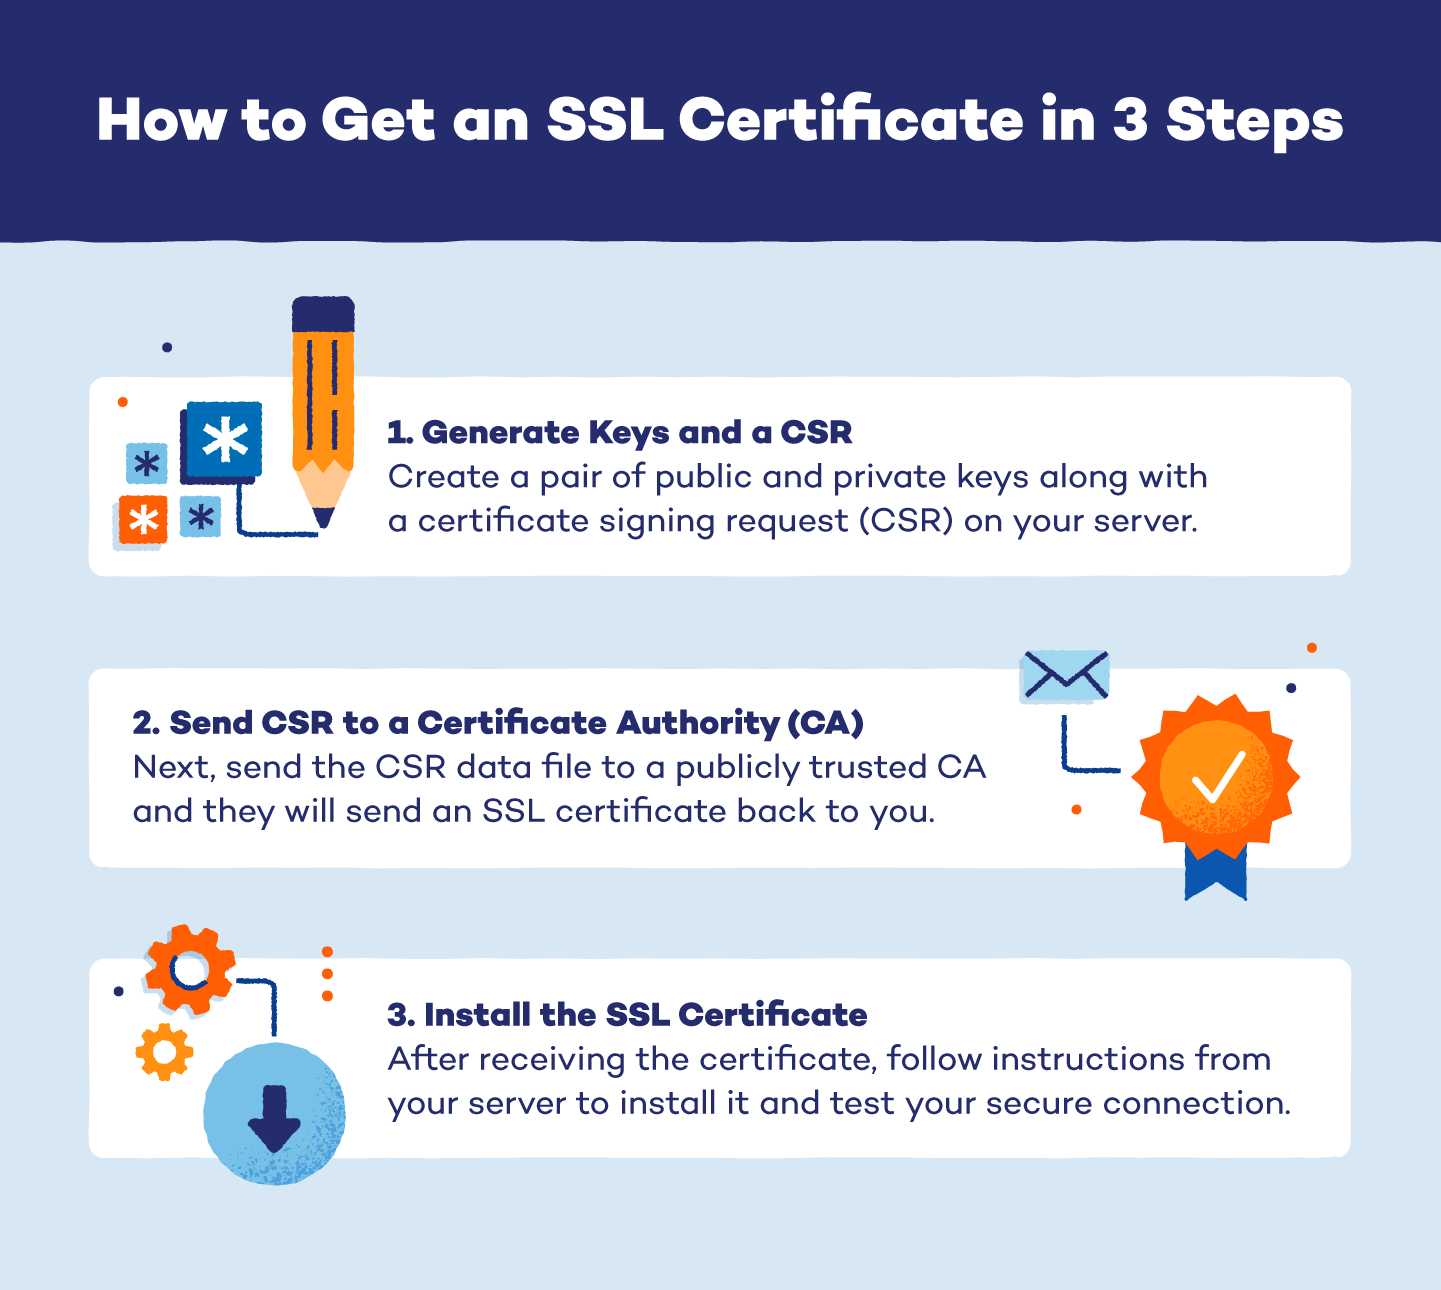 How to Get an SSL Certificate in 3 Steps